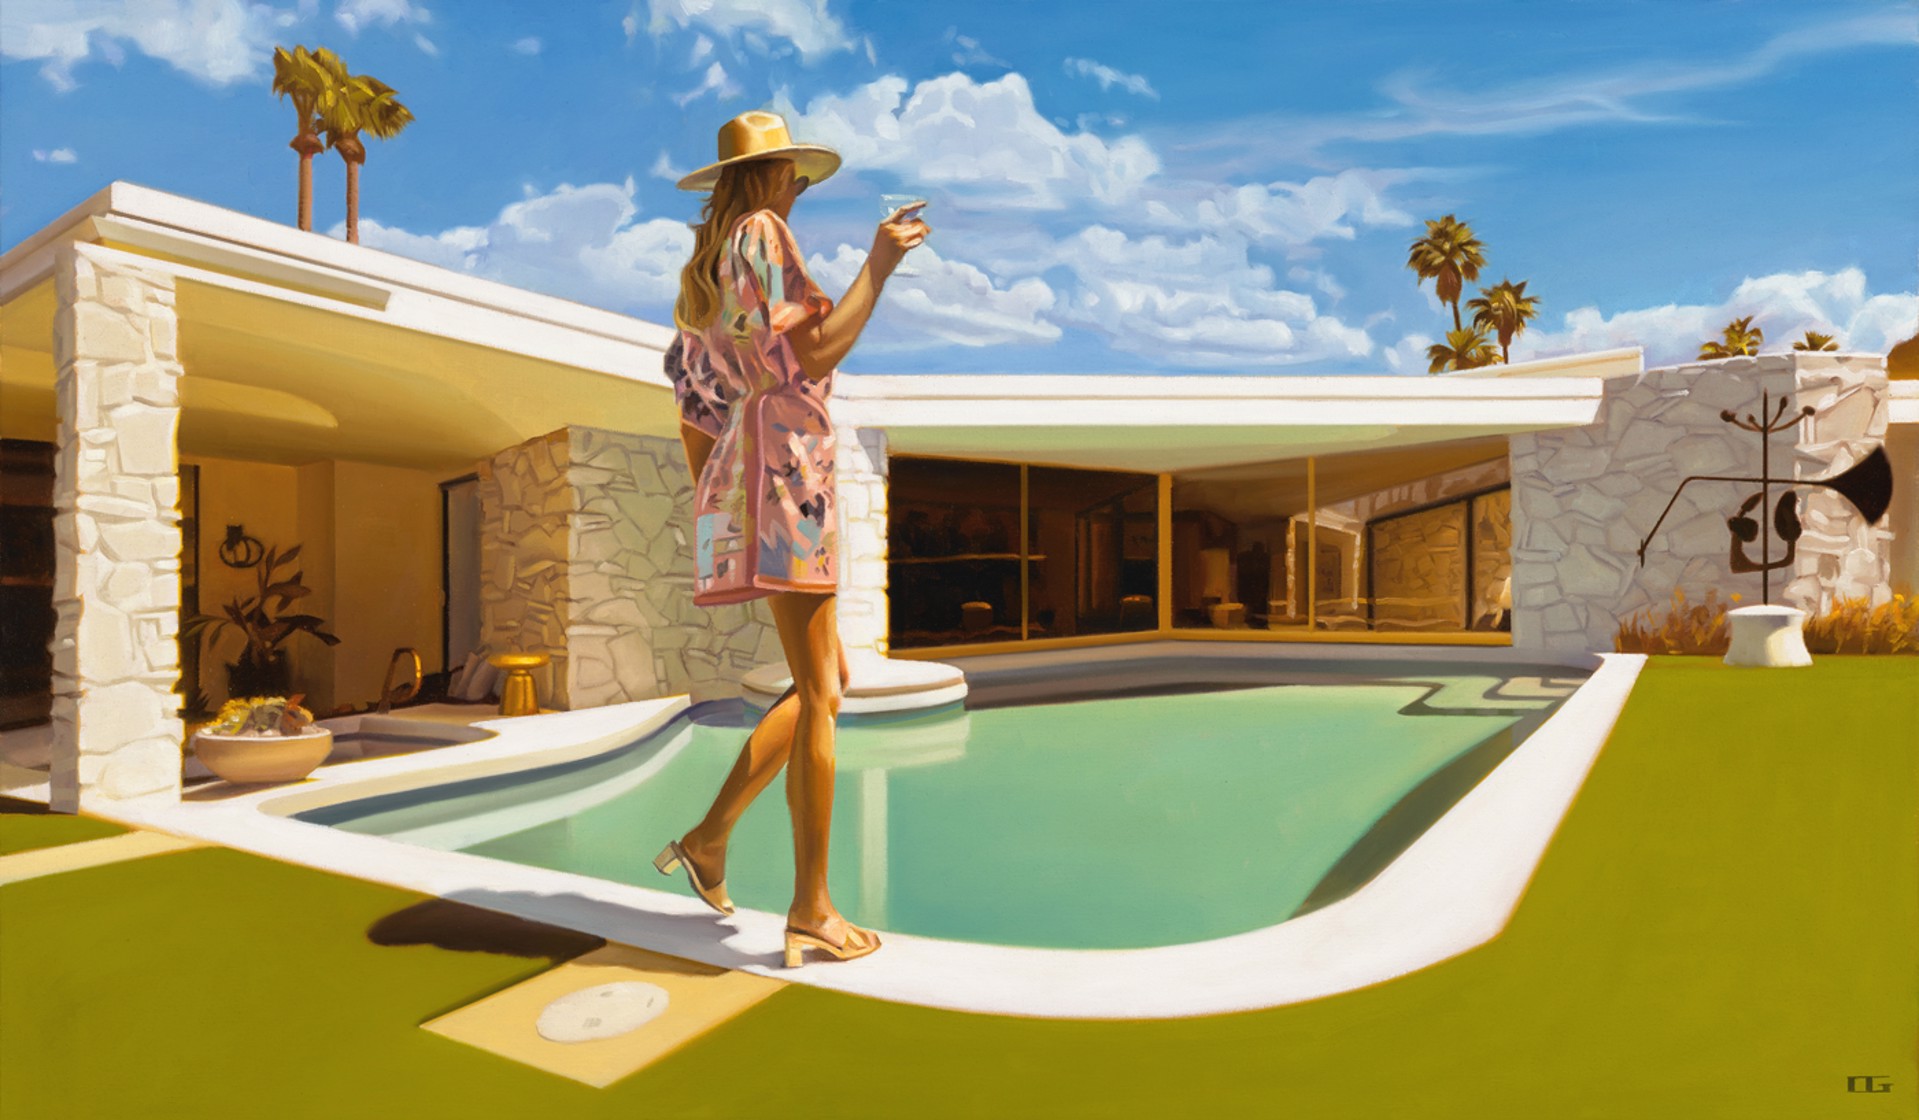 Palm Springs Perspective II (S/N) by Carrie Graber